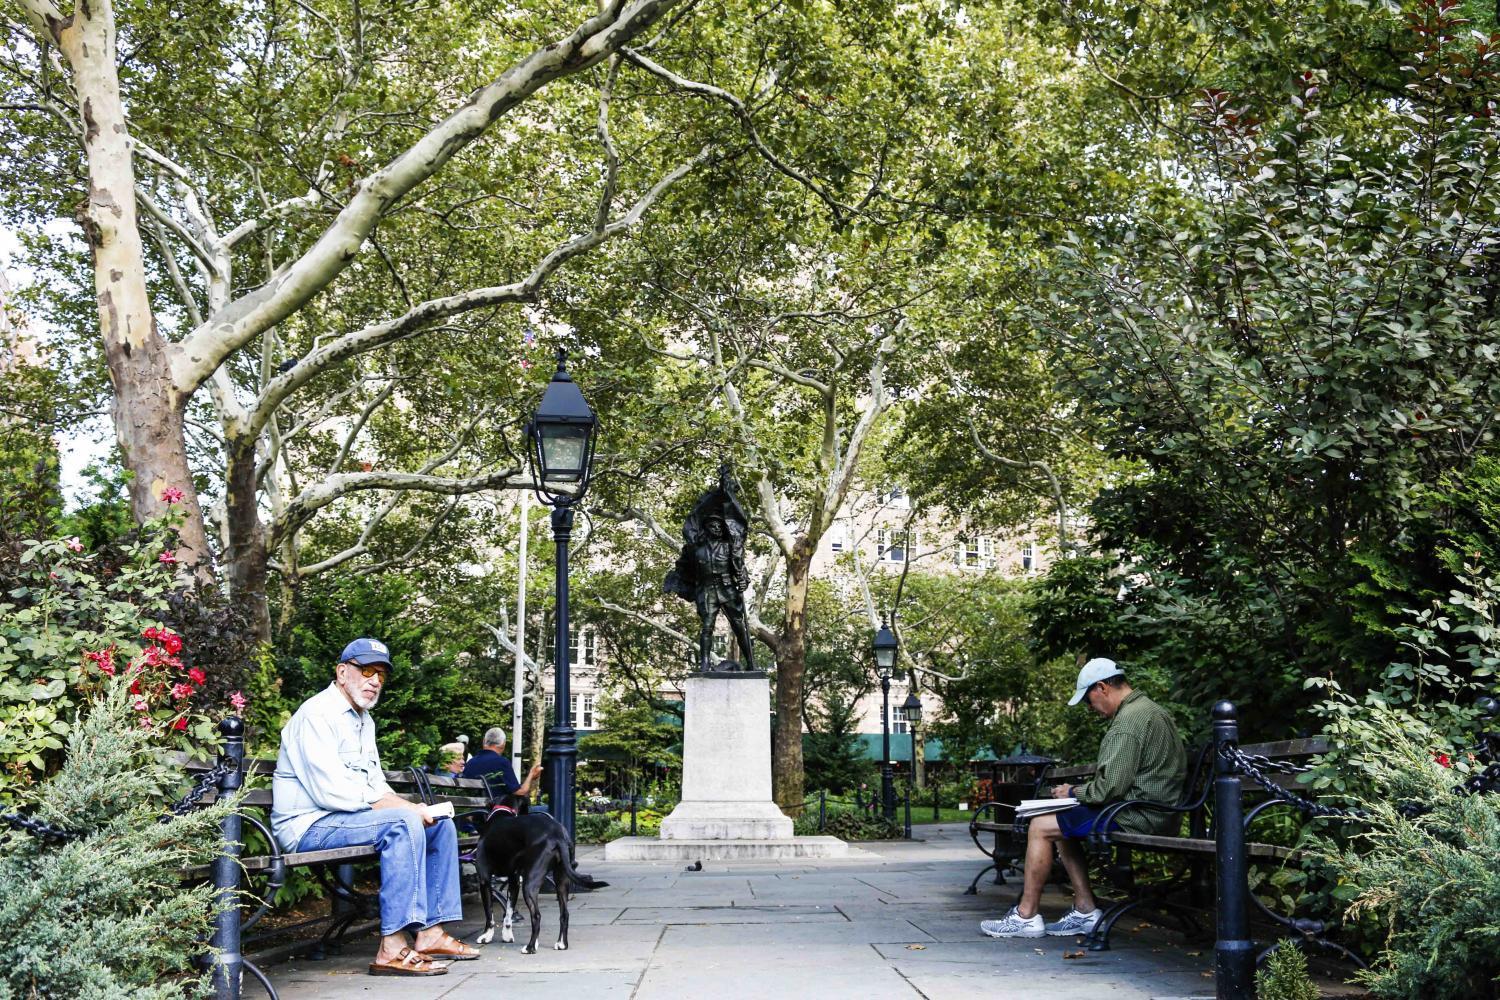 Abingdon Square Park is a little triangular park tucked away in the West Village where Hudson Street crosses Bleecker Street. 